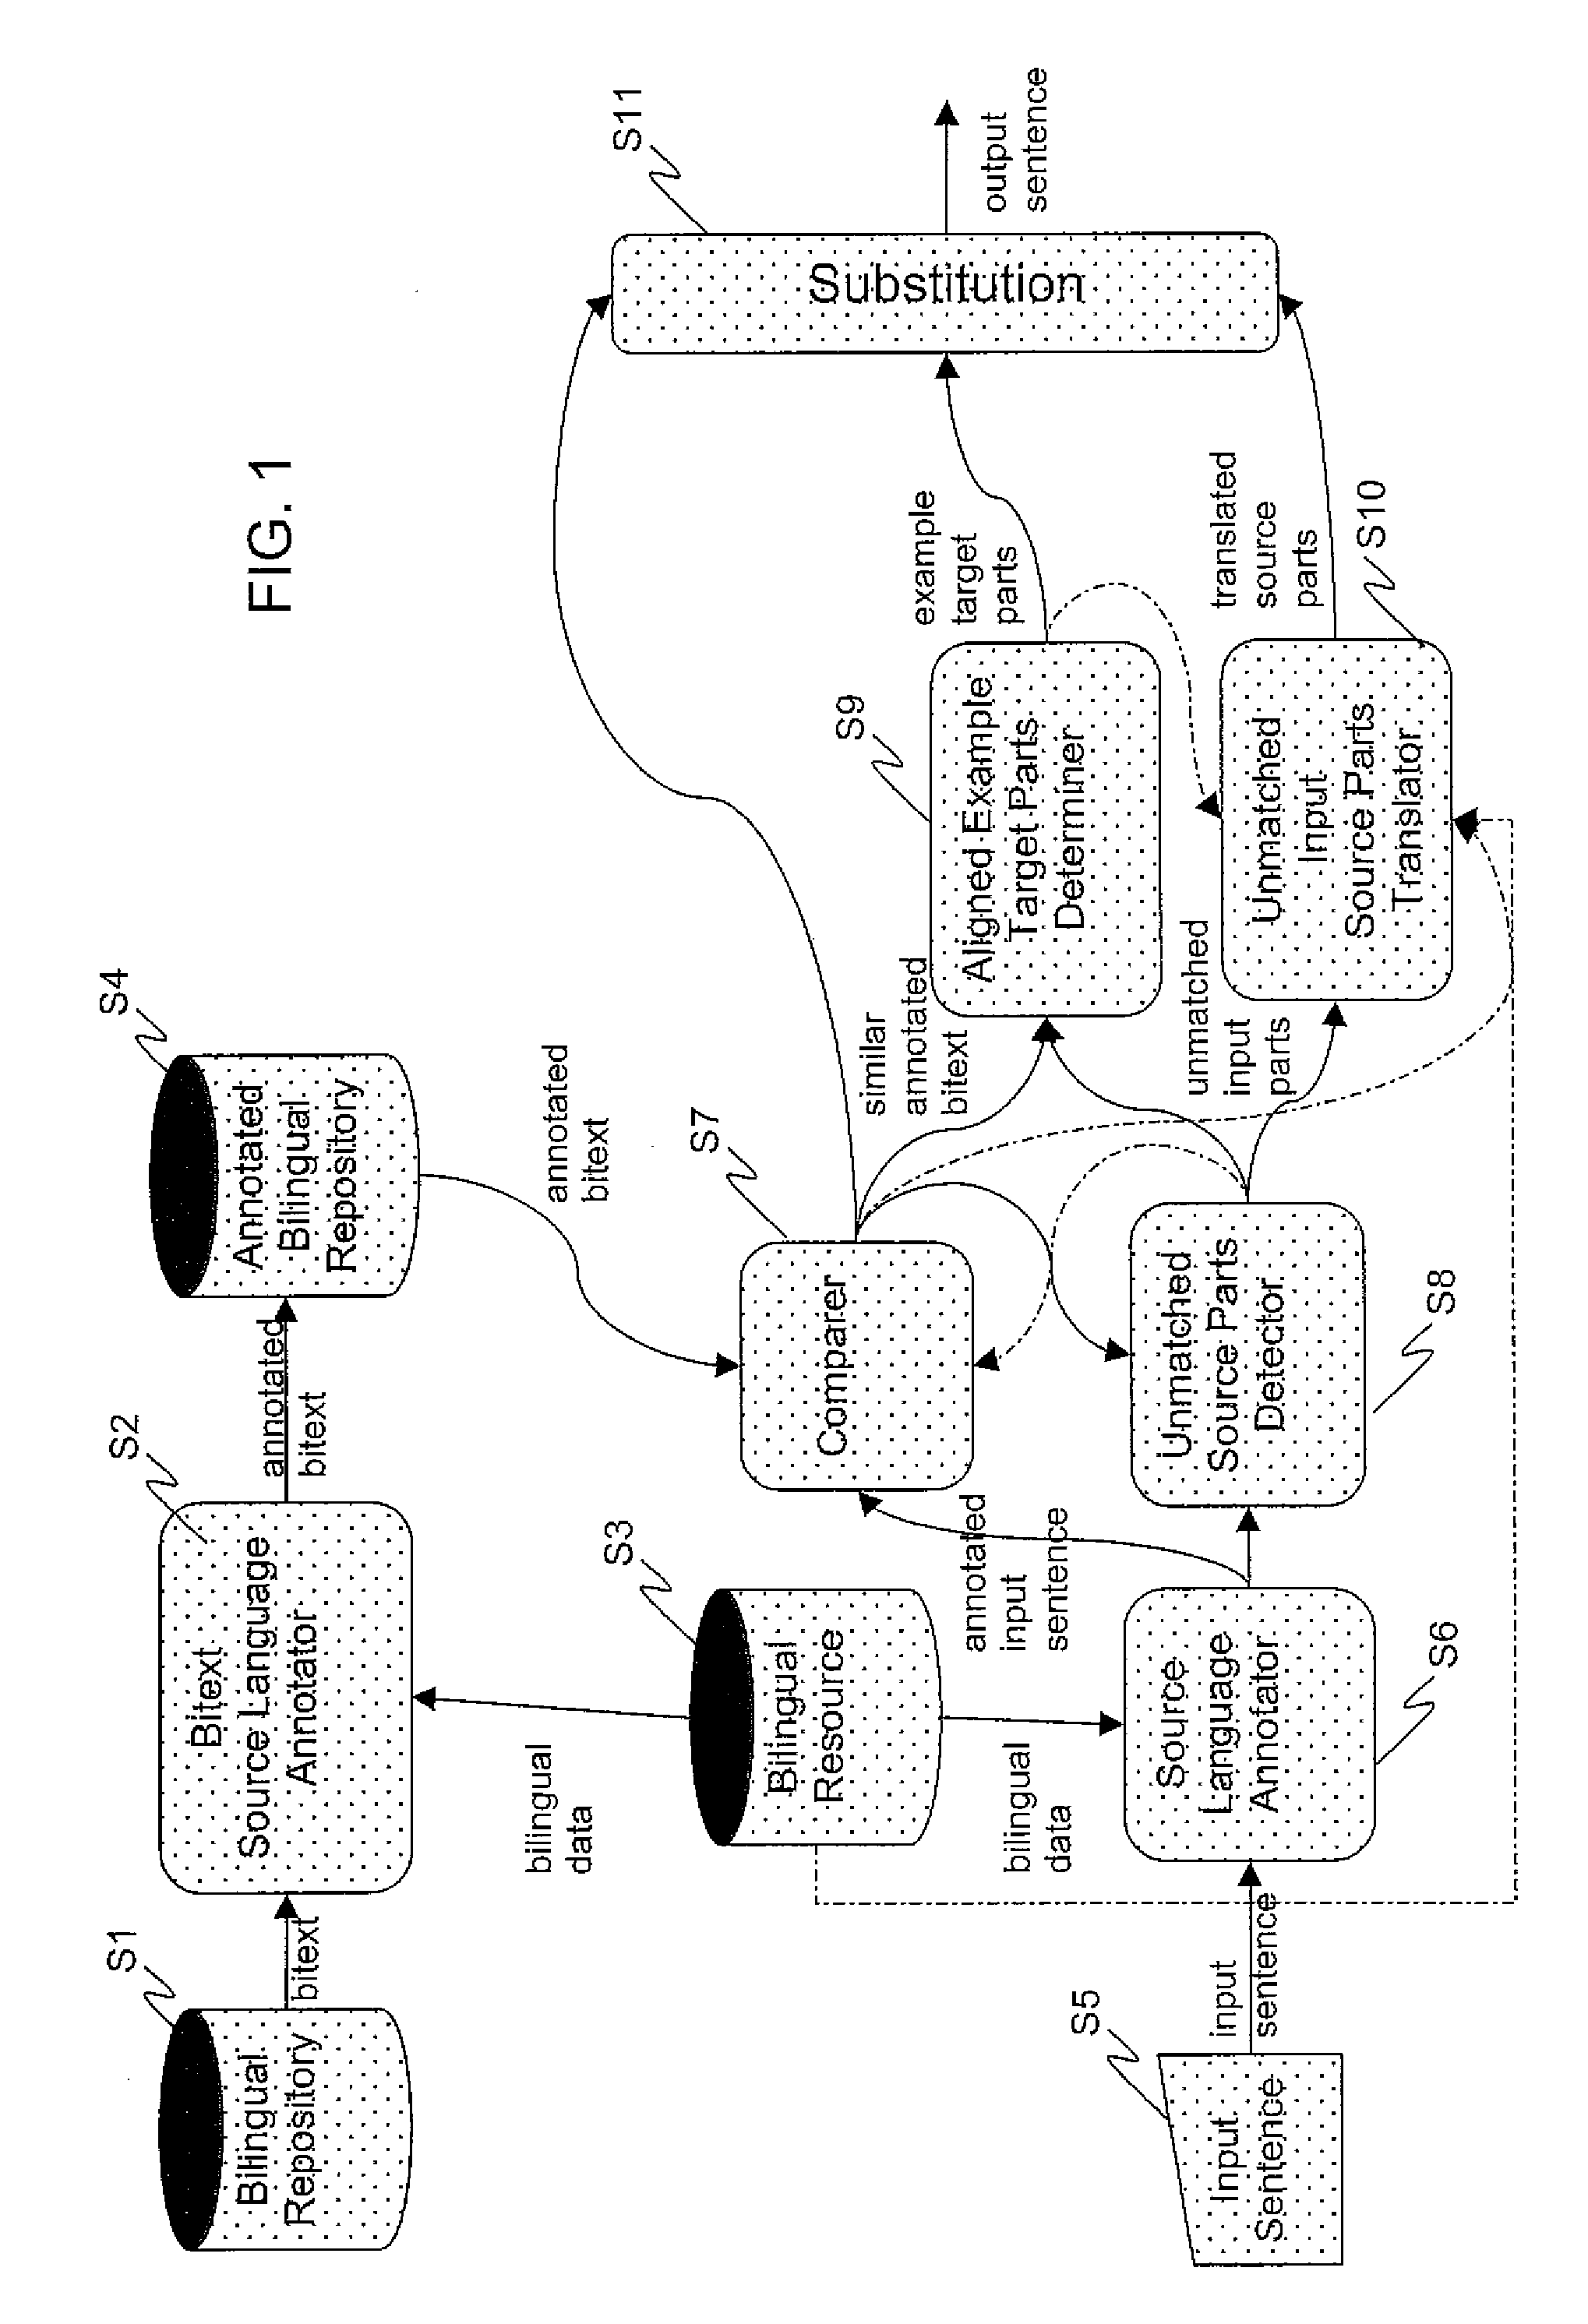 Method for matching of bilingual texts and increasing accuracy in translation systems